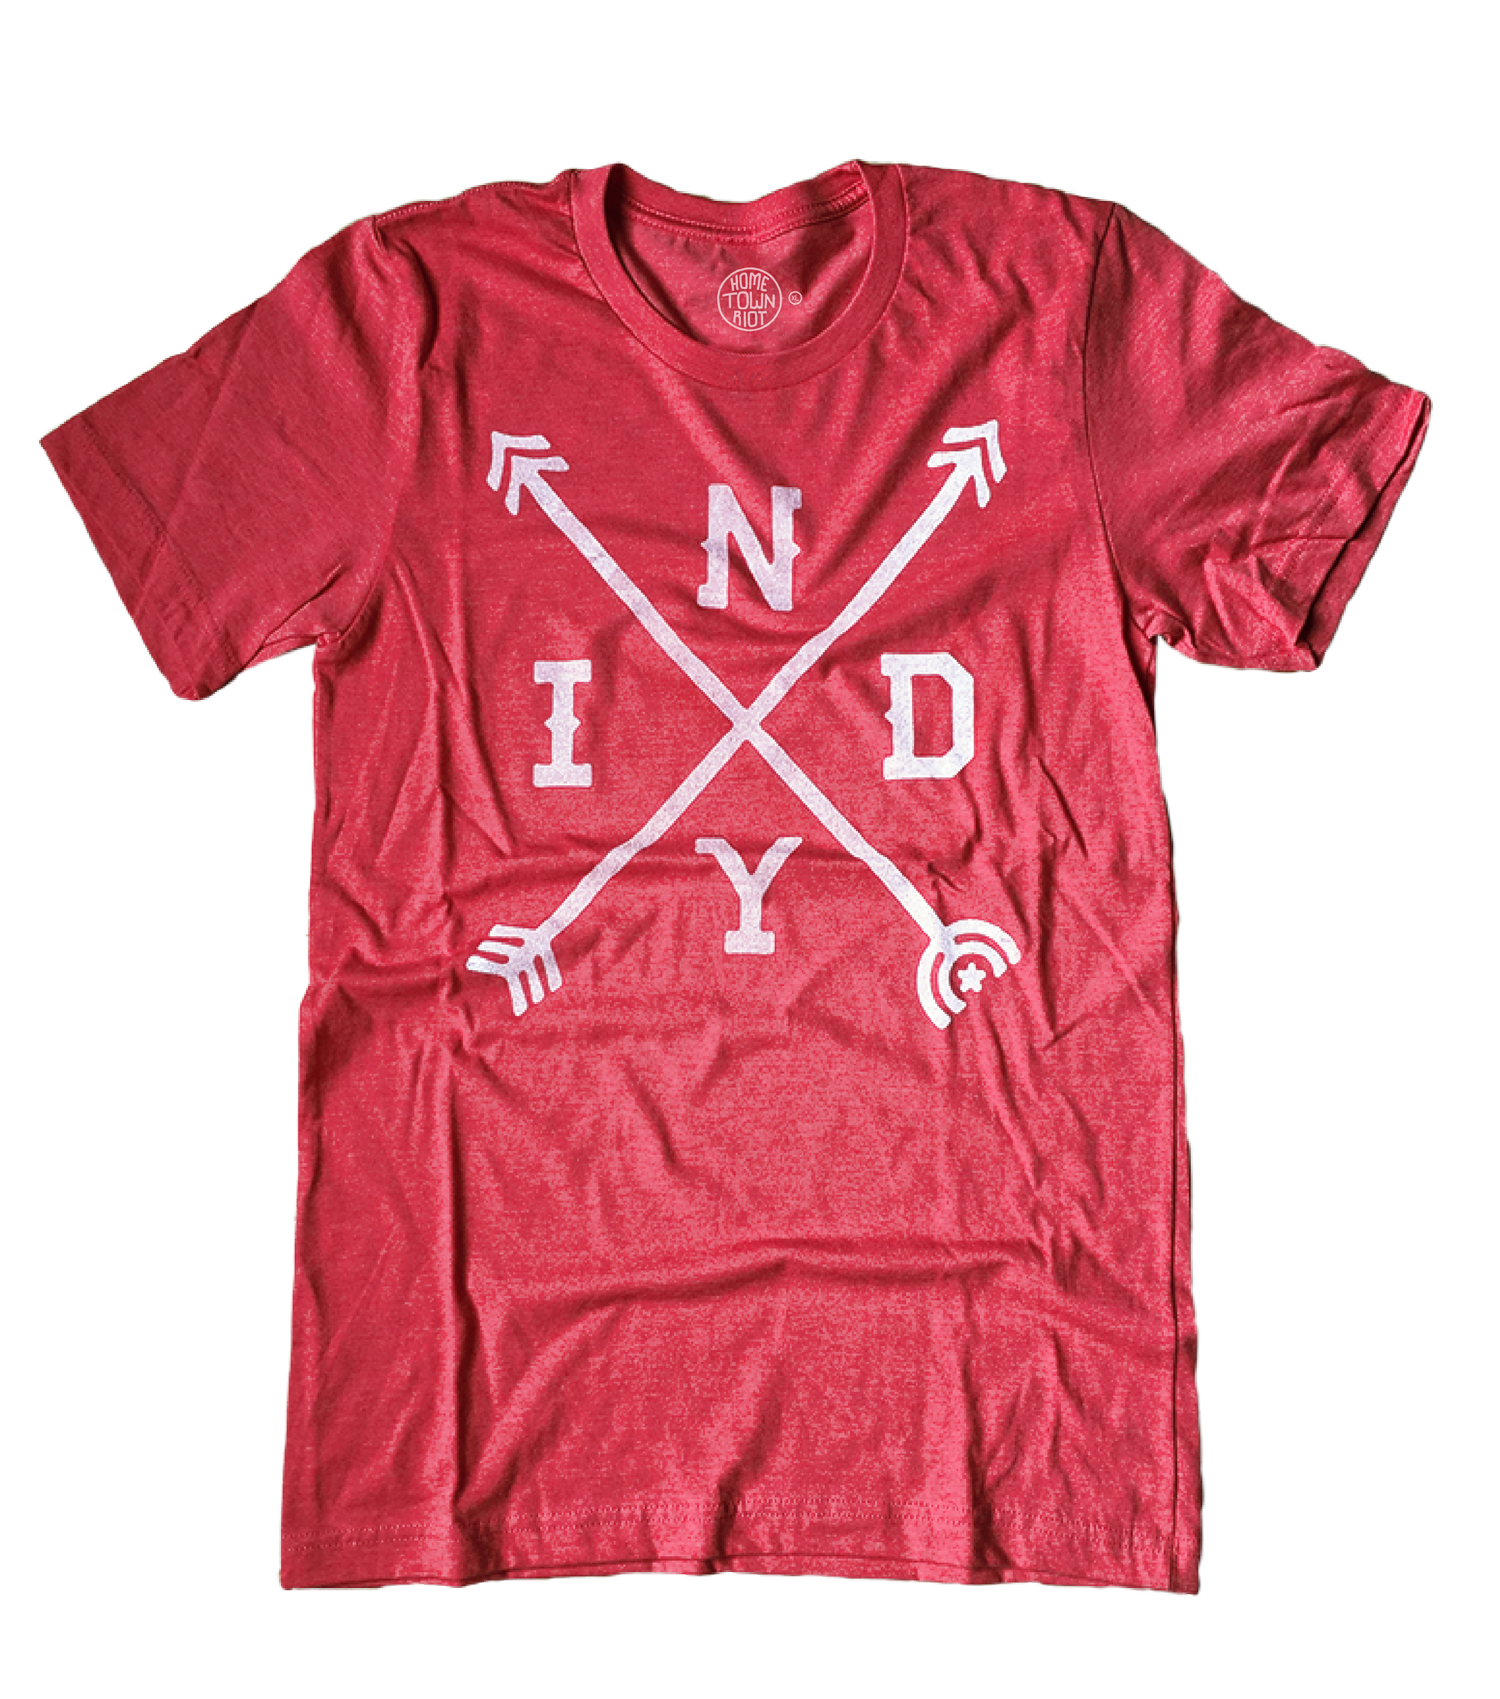 Red Indy Arrows Shirt - HomeTownRiot